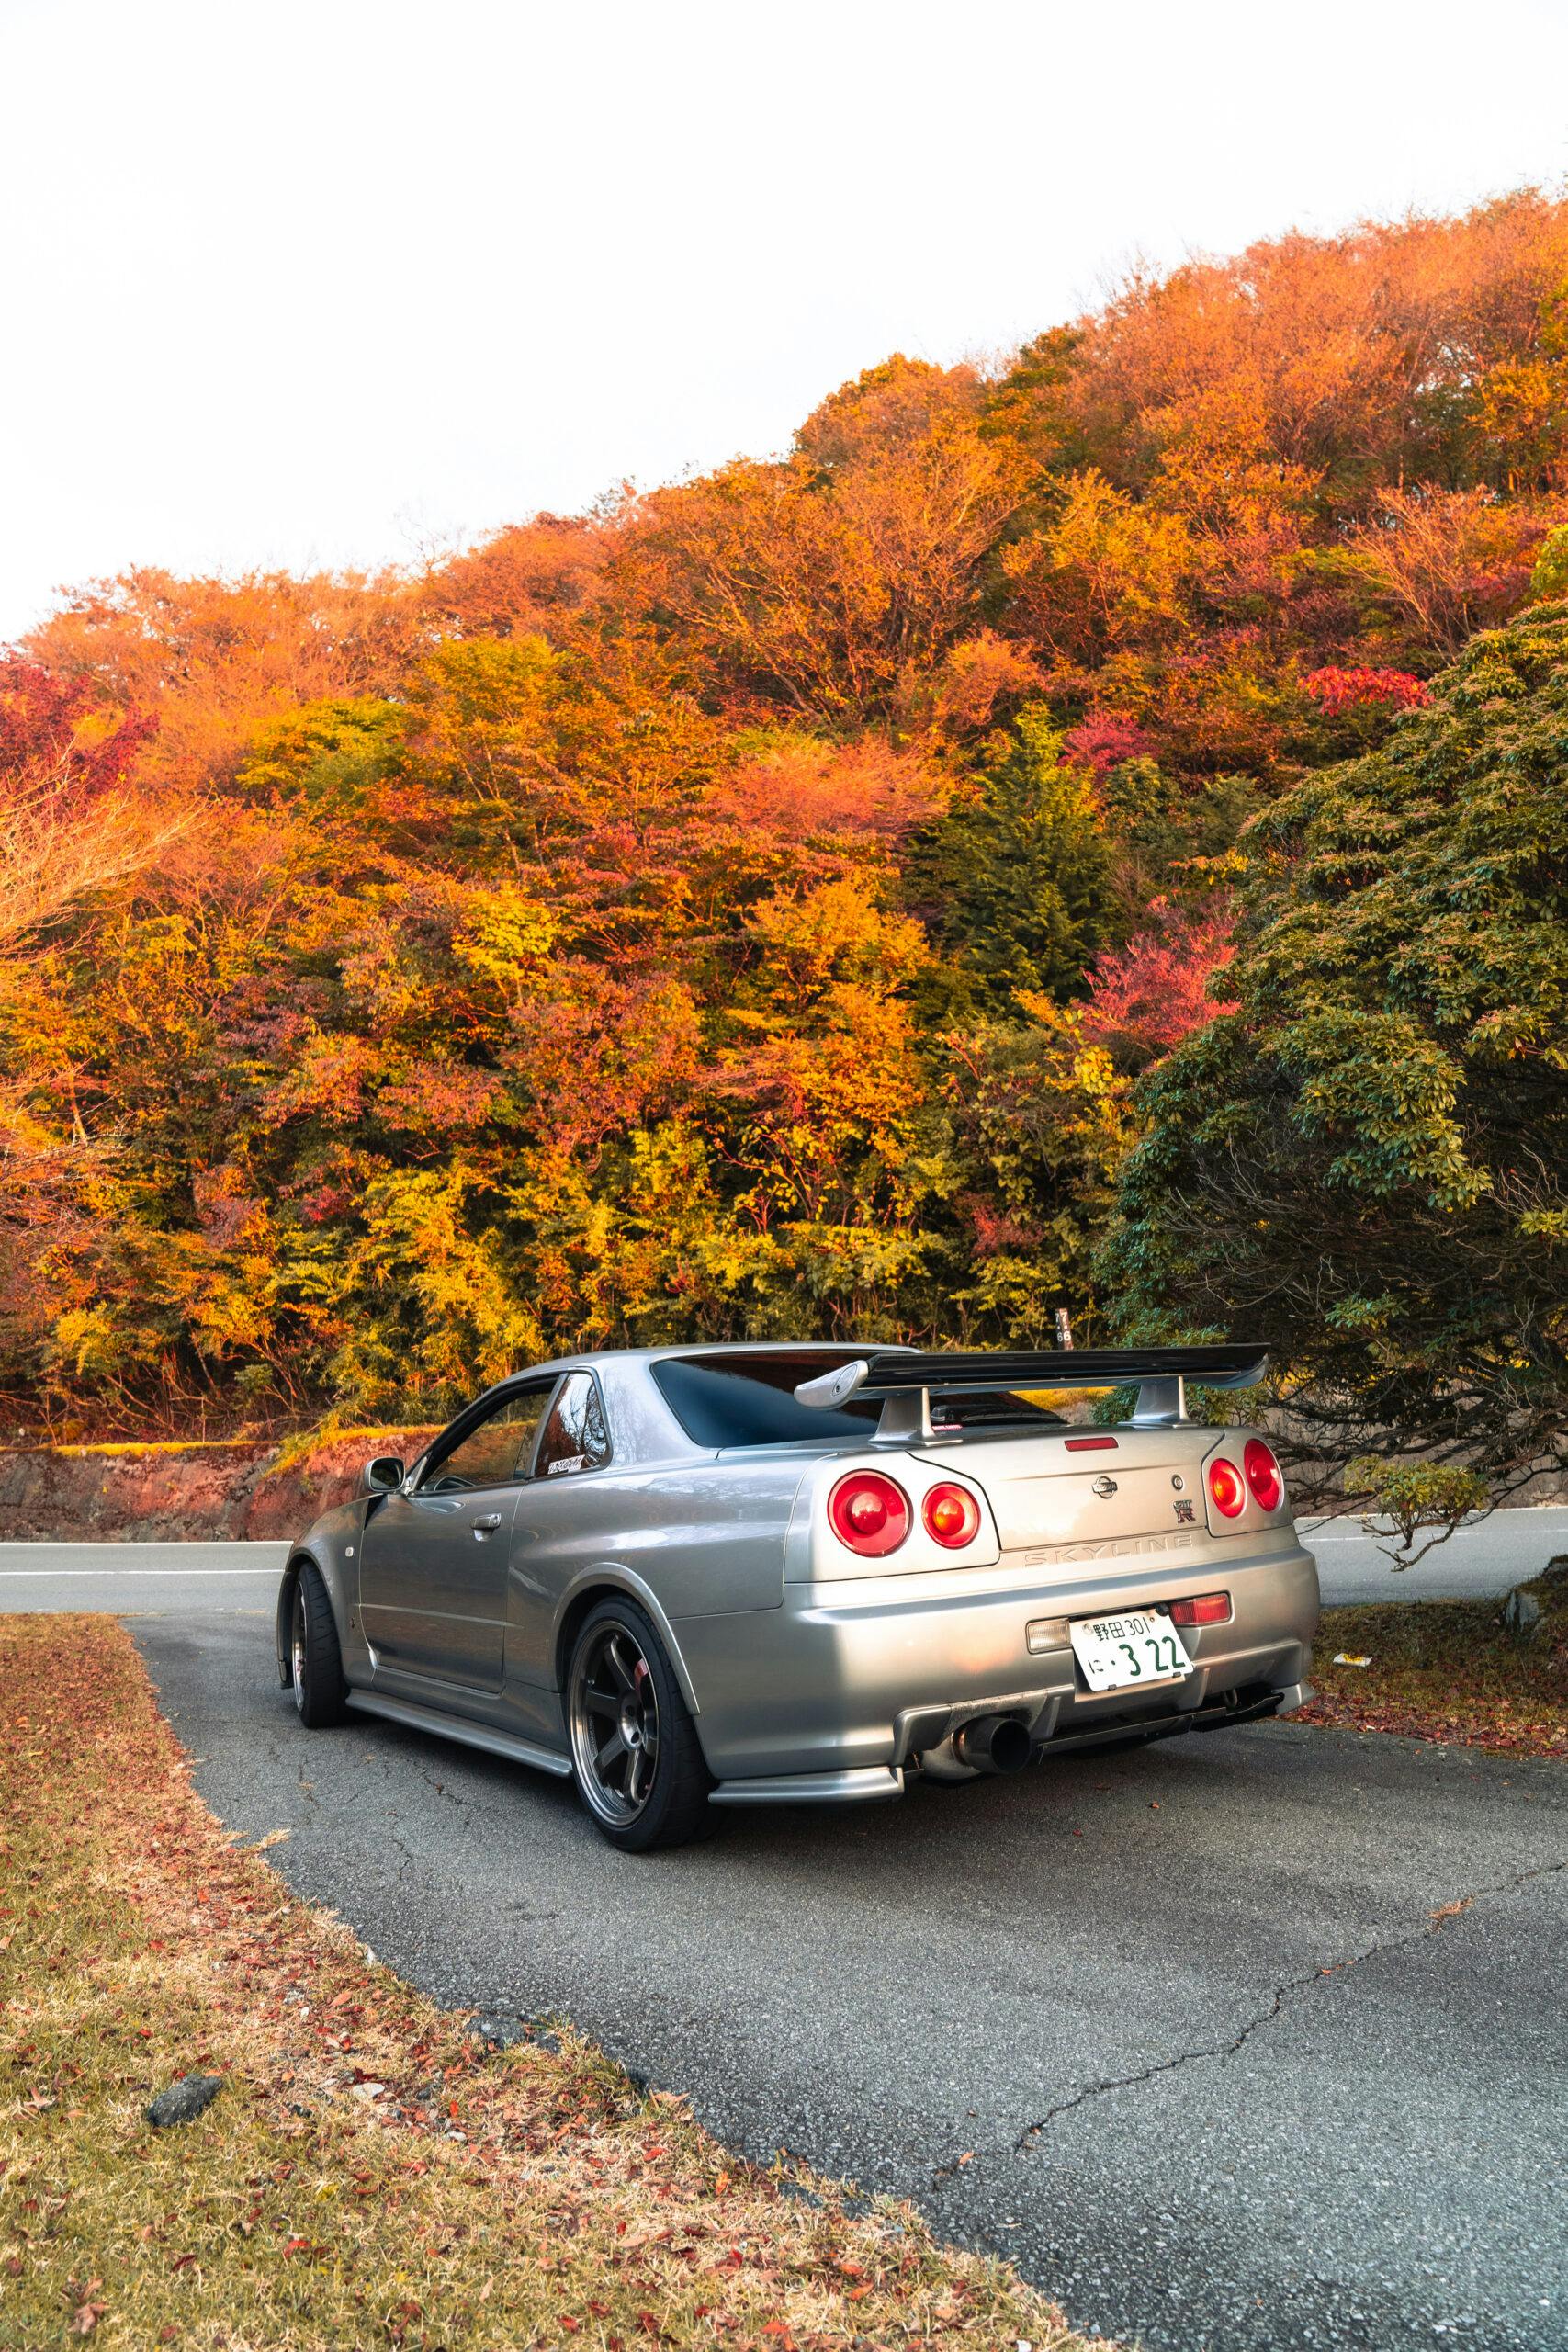 An R34 Nissan GT-R Might Be a Safer 2023 Investment Than Crypto